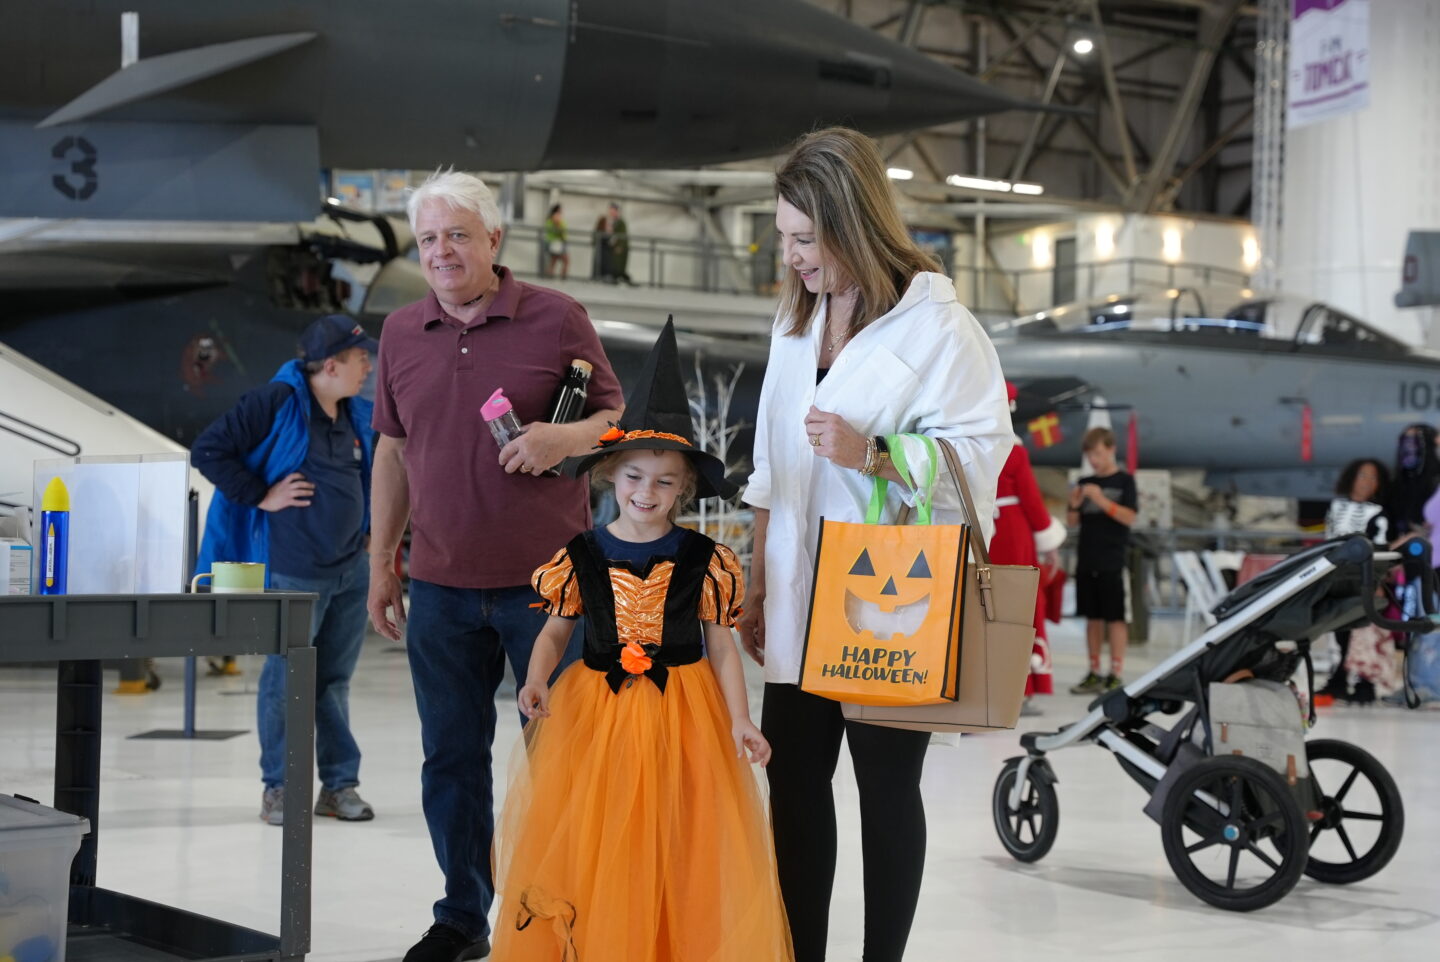 Child in costume with grandparents at Hauntings in the Hangar